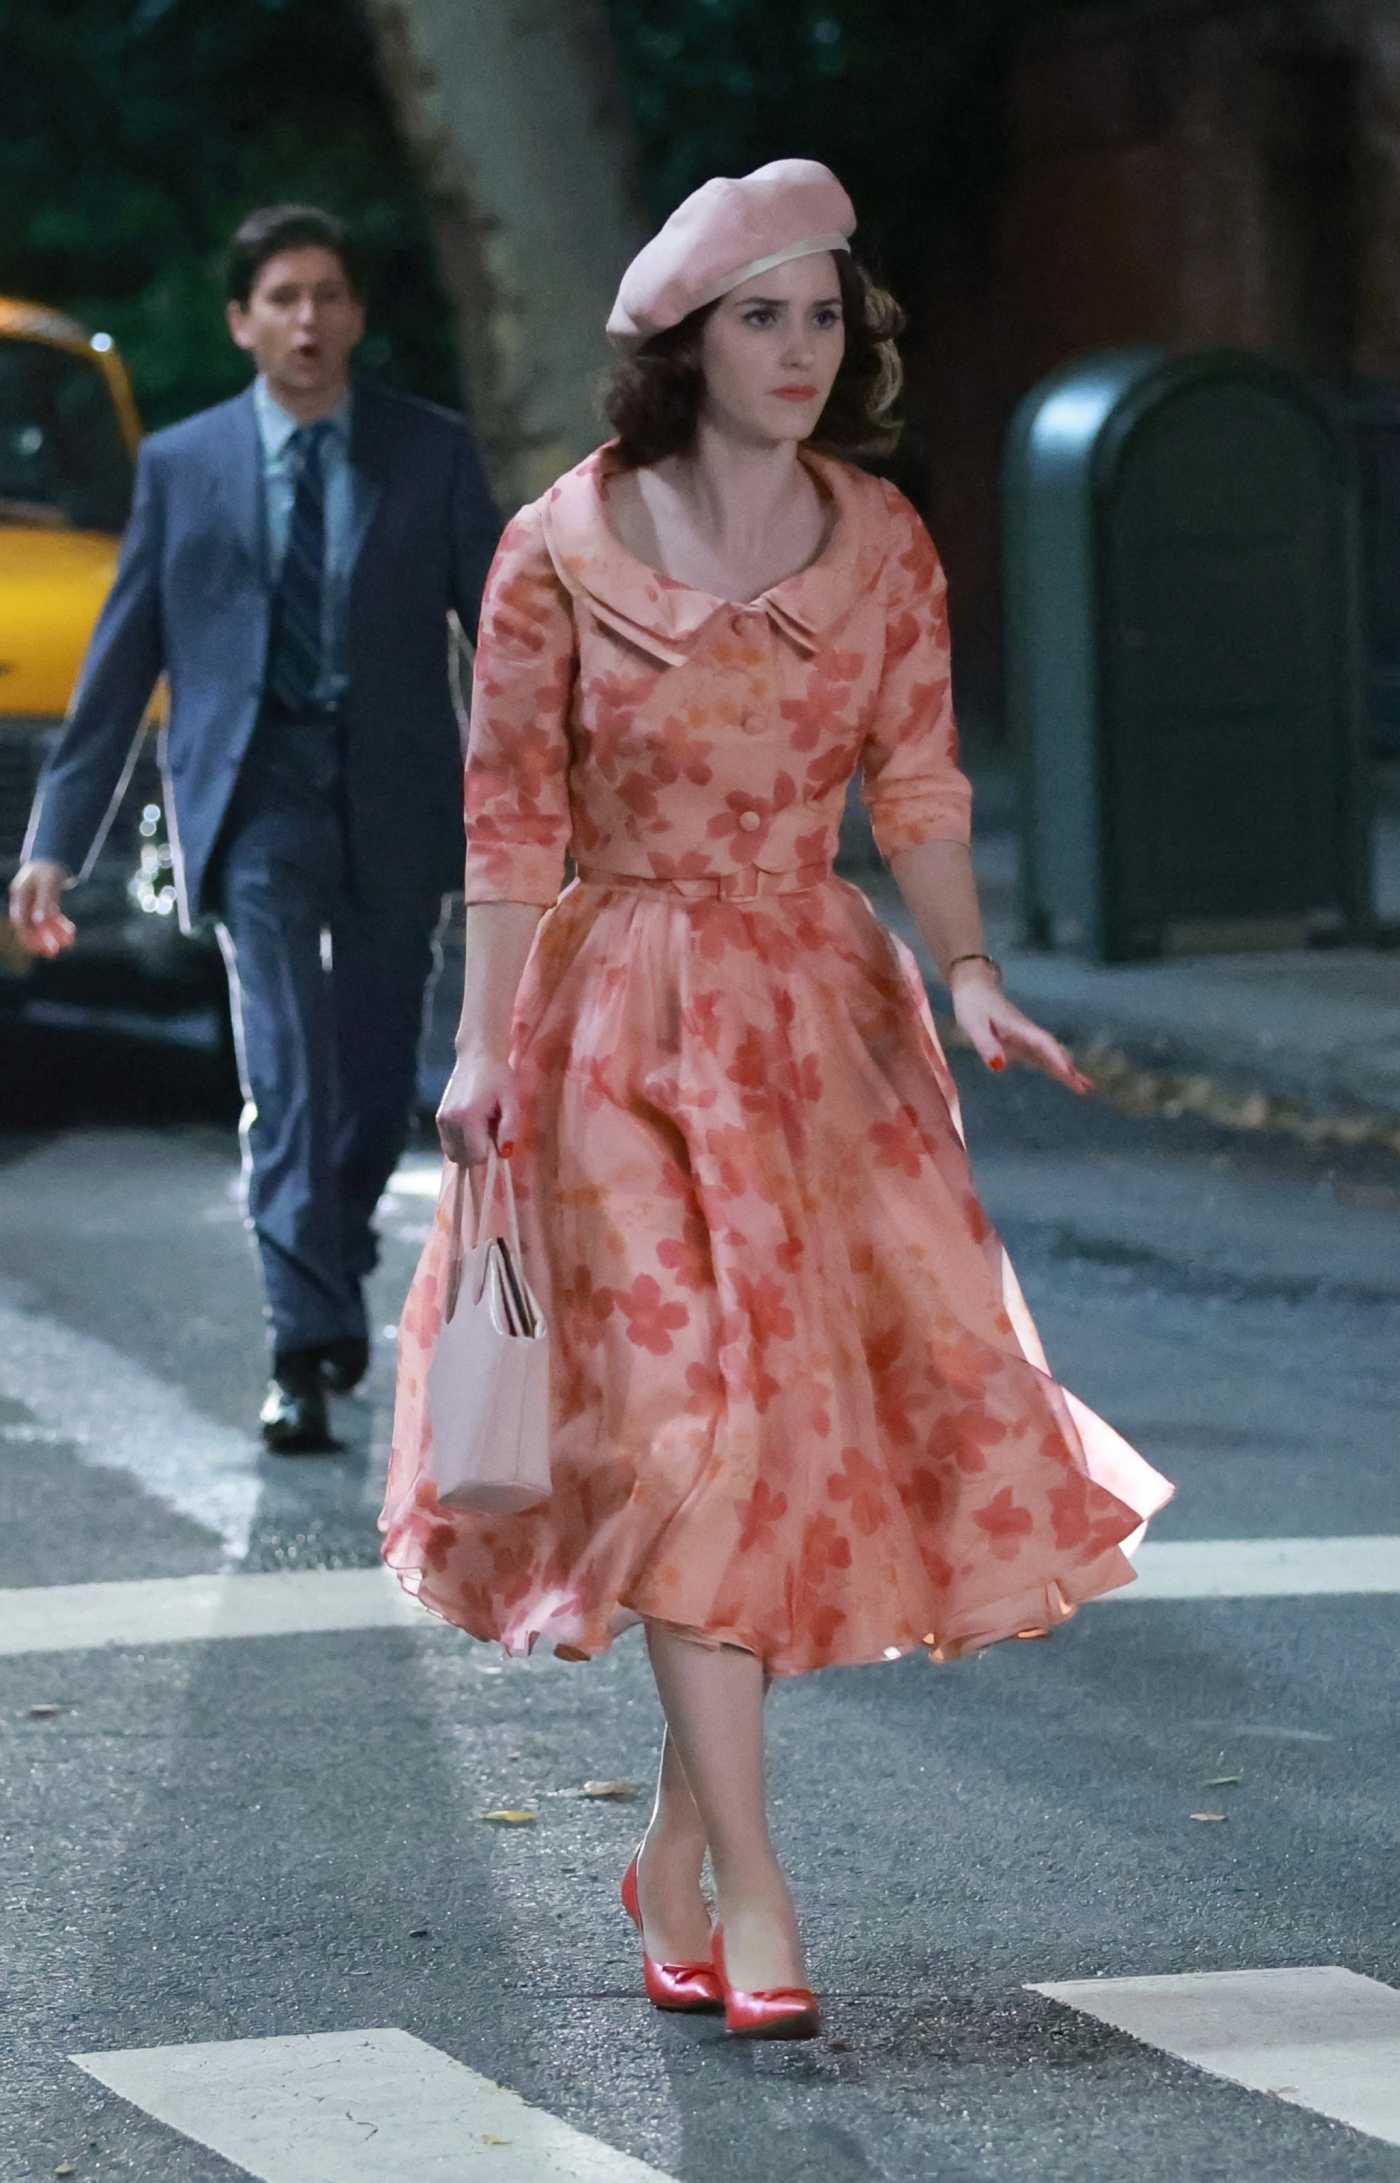 Rachel Brosnahan in a Pink Beret Films The Marvelous Mrs. Maisel in Brooklyn in New York 10/07/2022